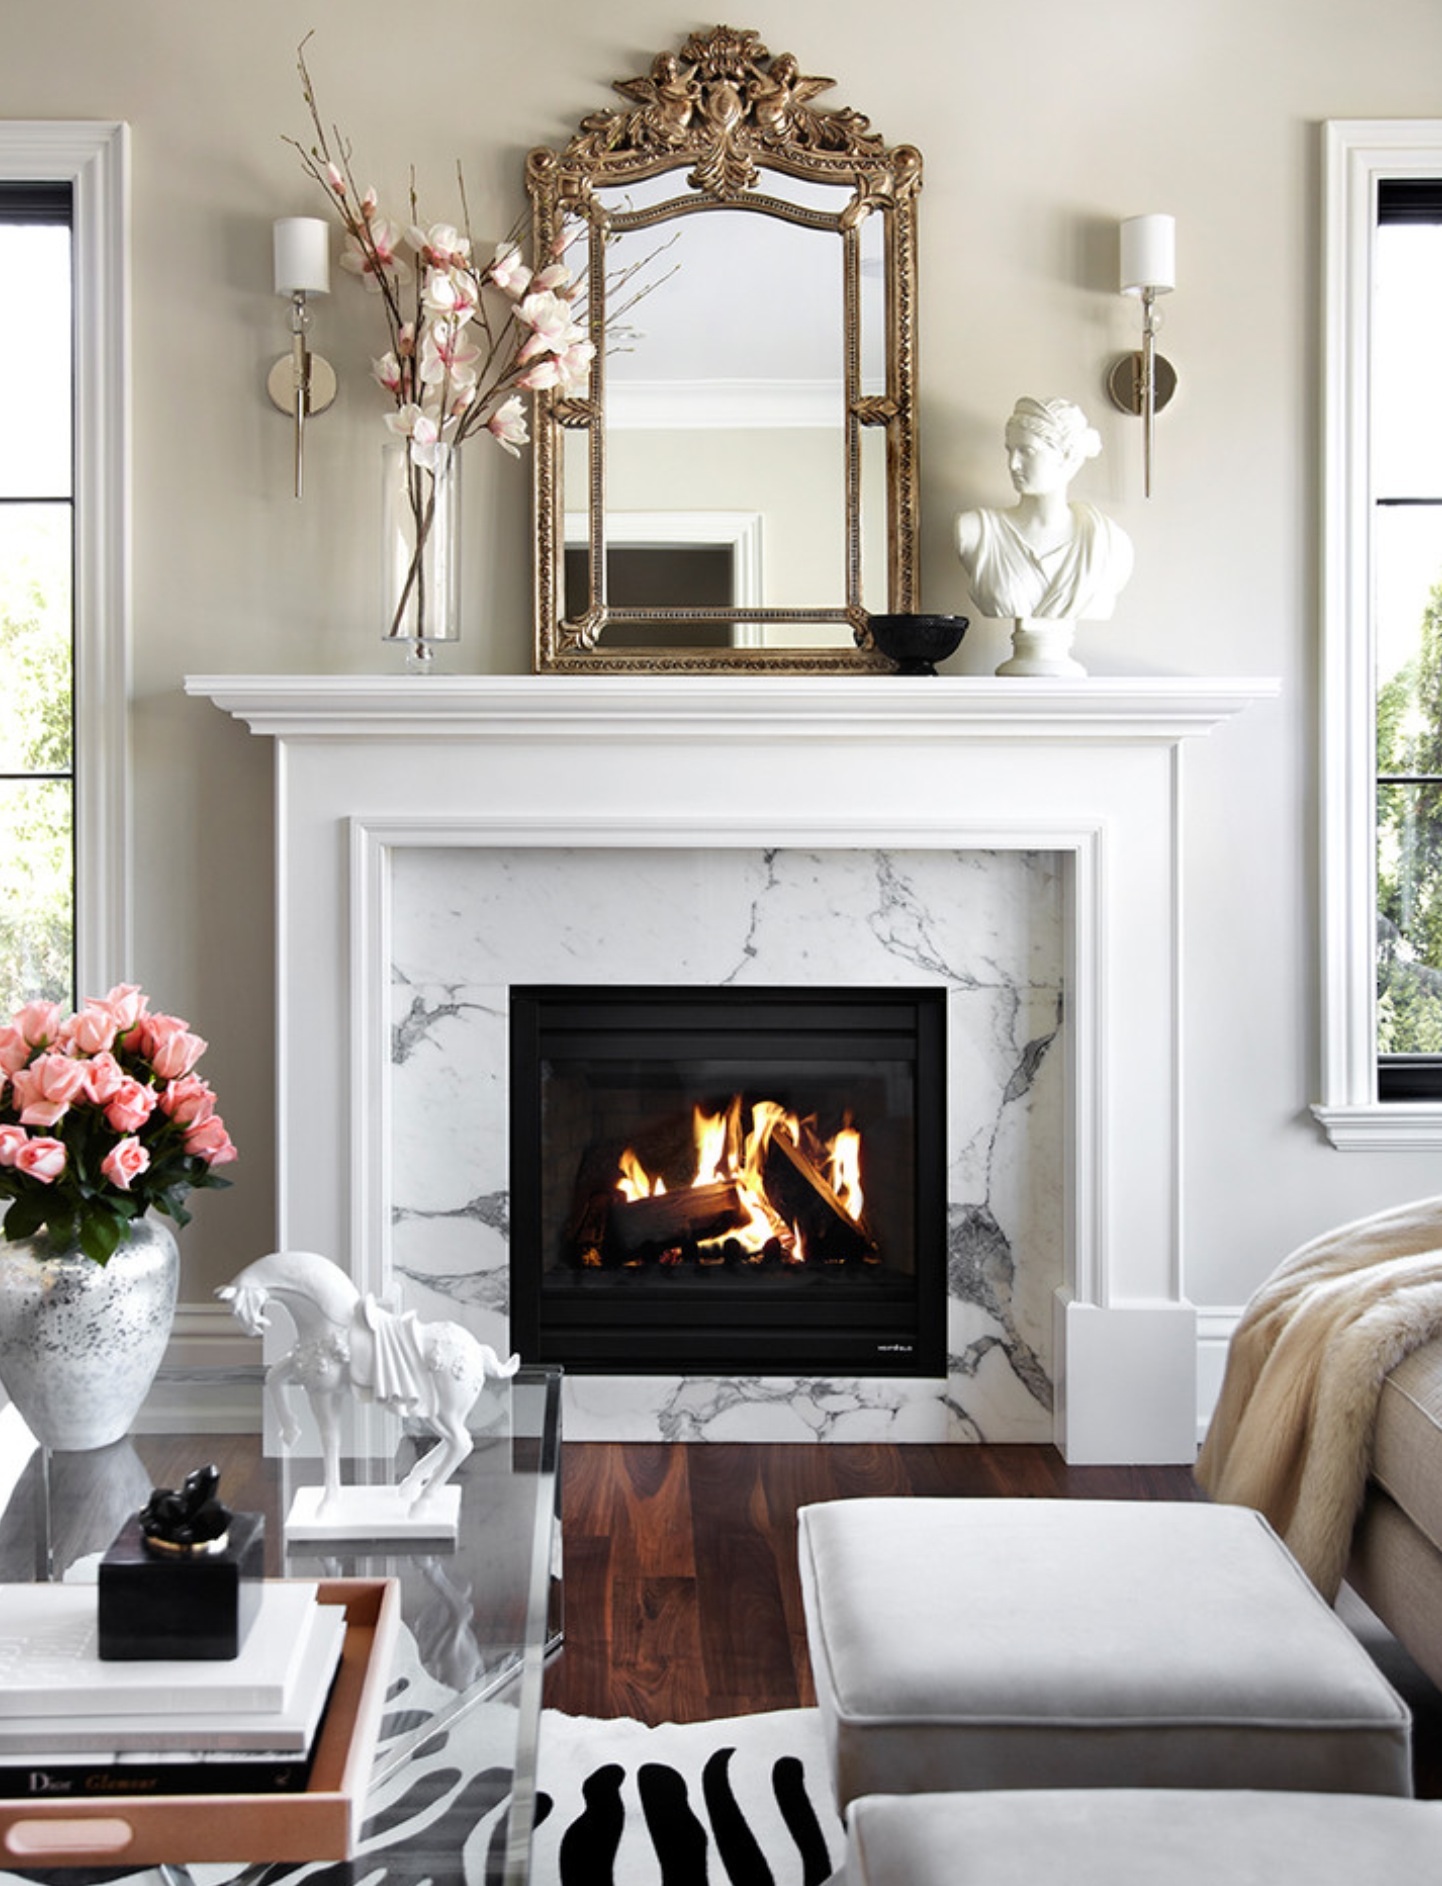 40 Awesome Living Room Designs With Fireplace - Decoration Love